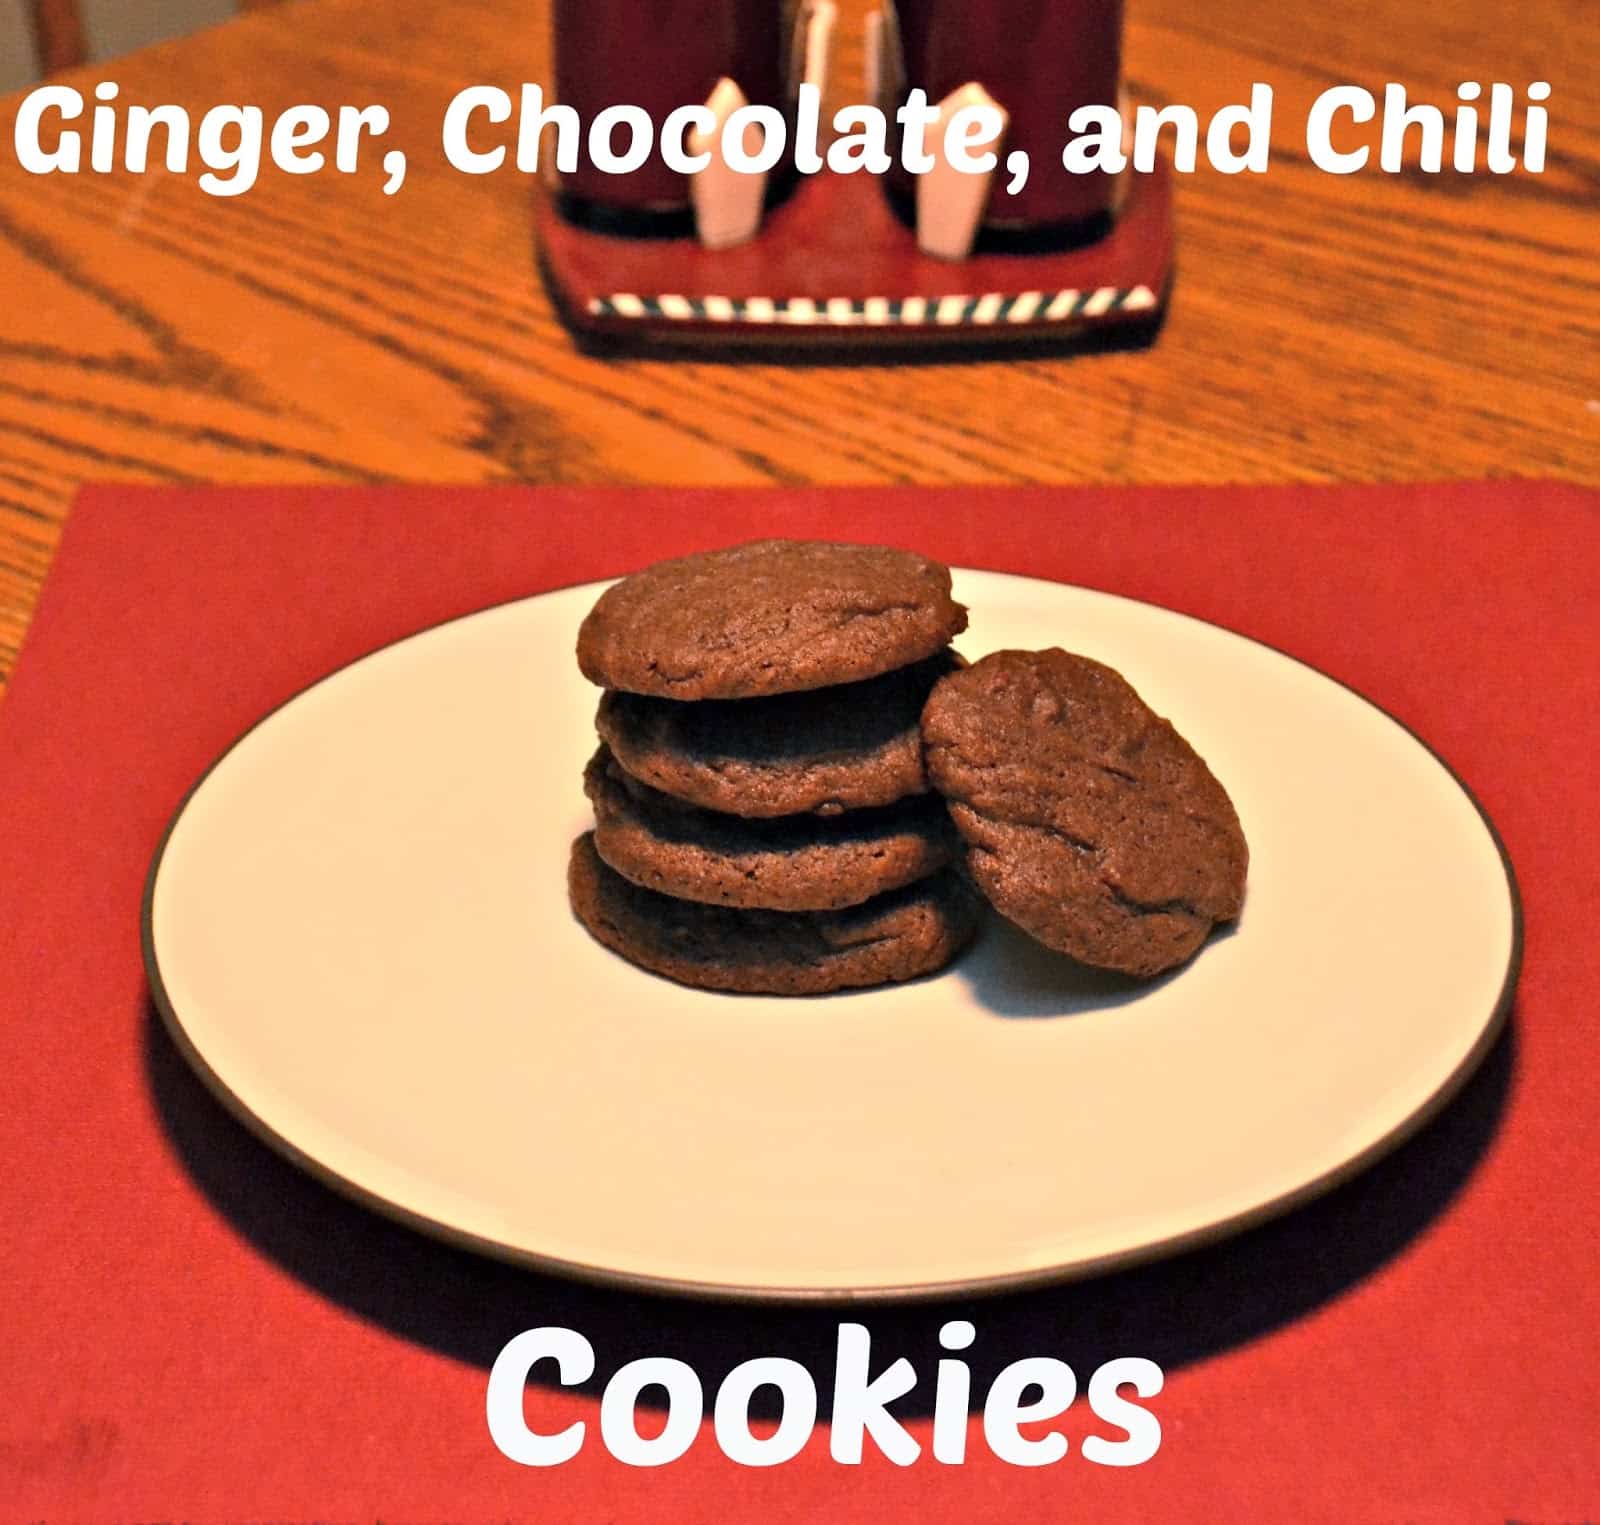 Ginger, Chocolate, and Chili Cookies